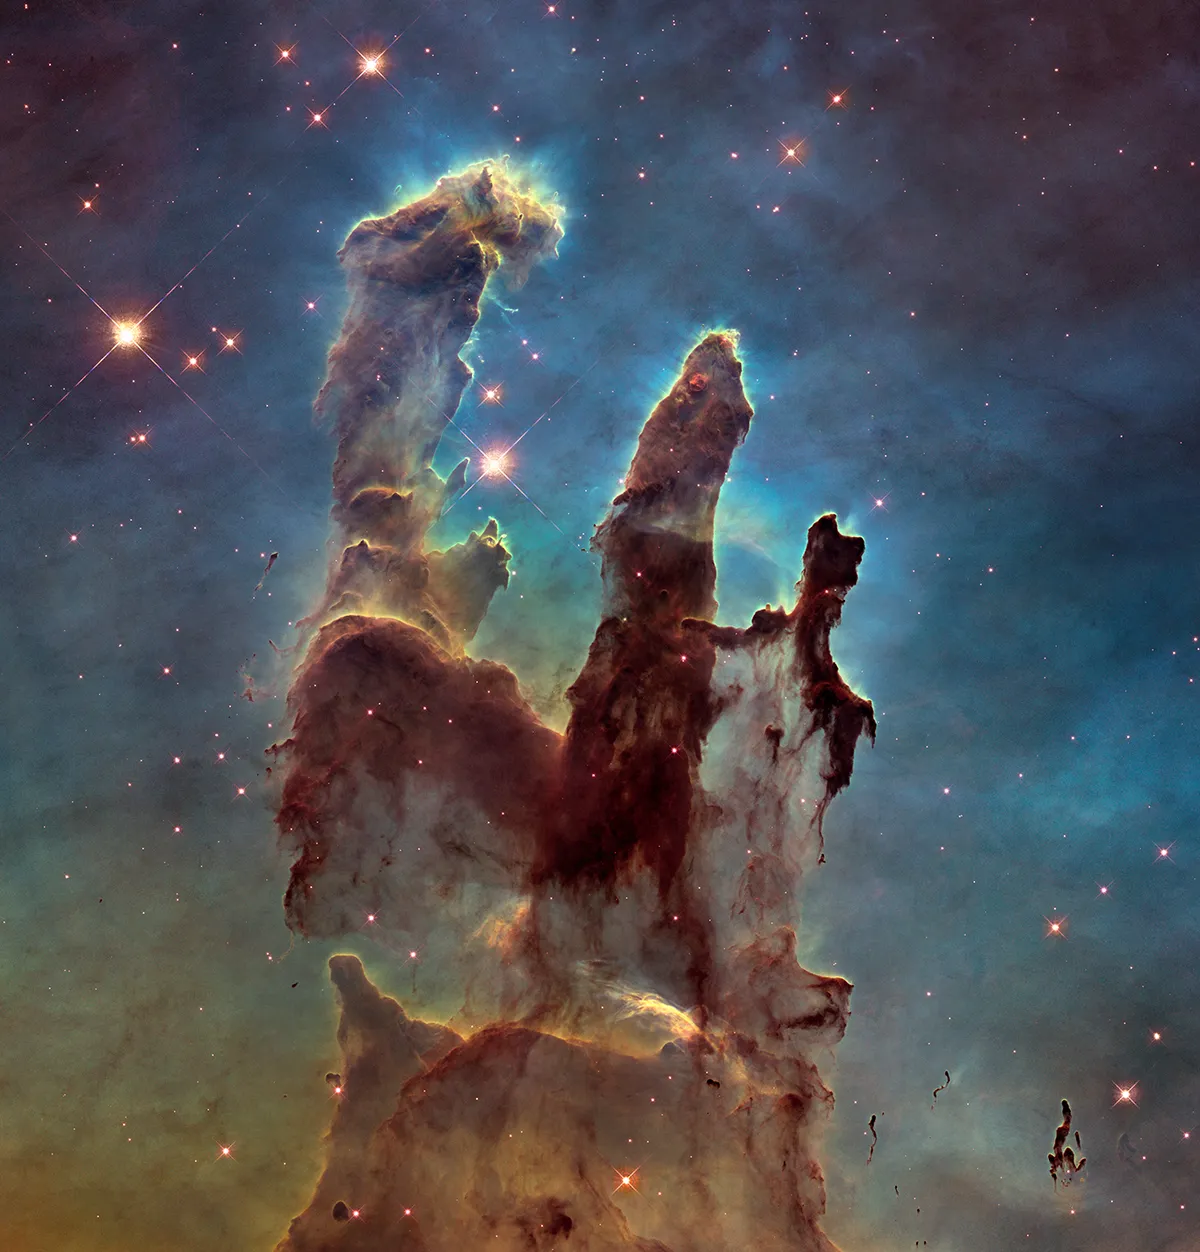 Buried in the Eagle Nebula is a region of intense star formation. Hubble took an image of the region back in 1995, and their column shaped form earned the region the name "The Pillars of Creation".